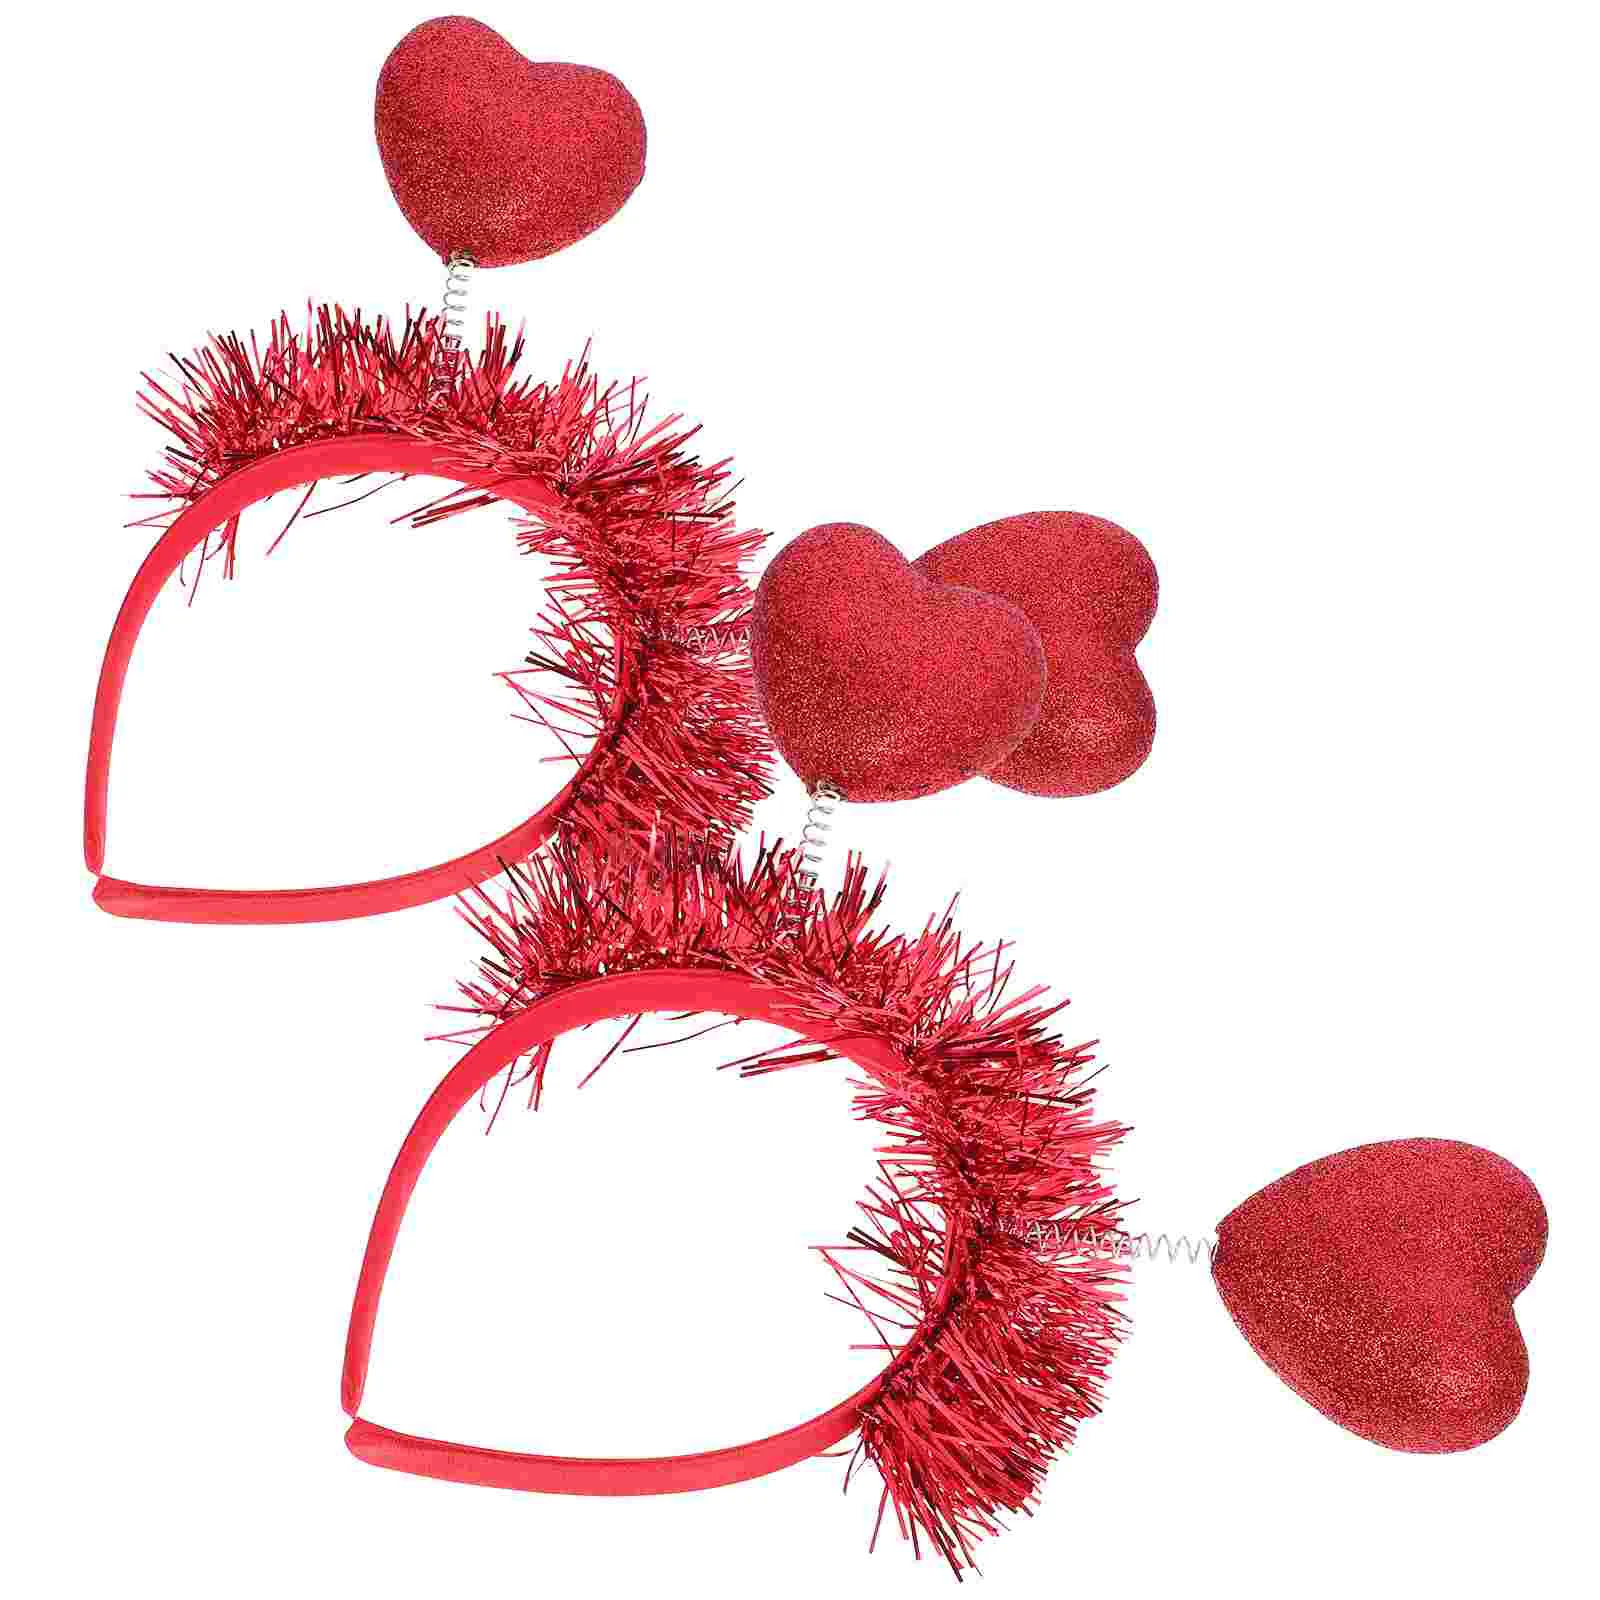 2 Pcs Love Headband Props Valentines Day Party Hairband Wedding Decorations Photography Headpiece Heart-shaped newborn baby photography props handmade wool mini doctor books telephone computer decorations for studio shoots photo props